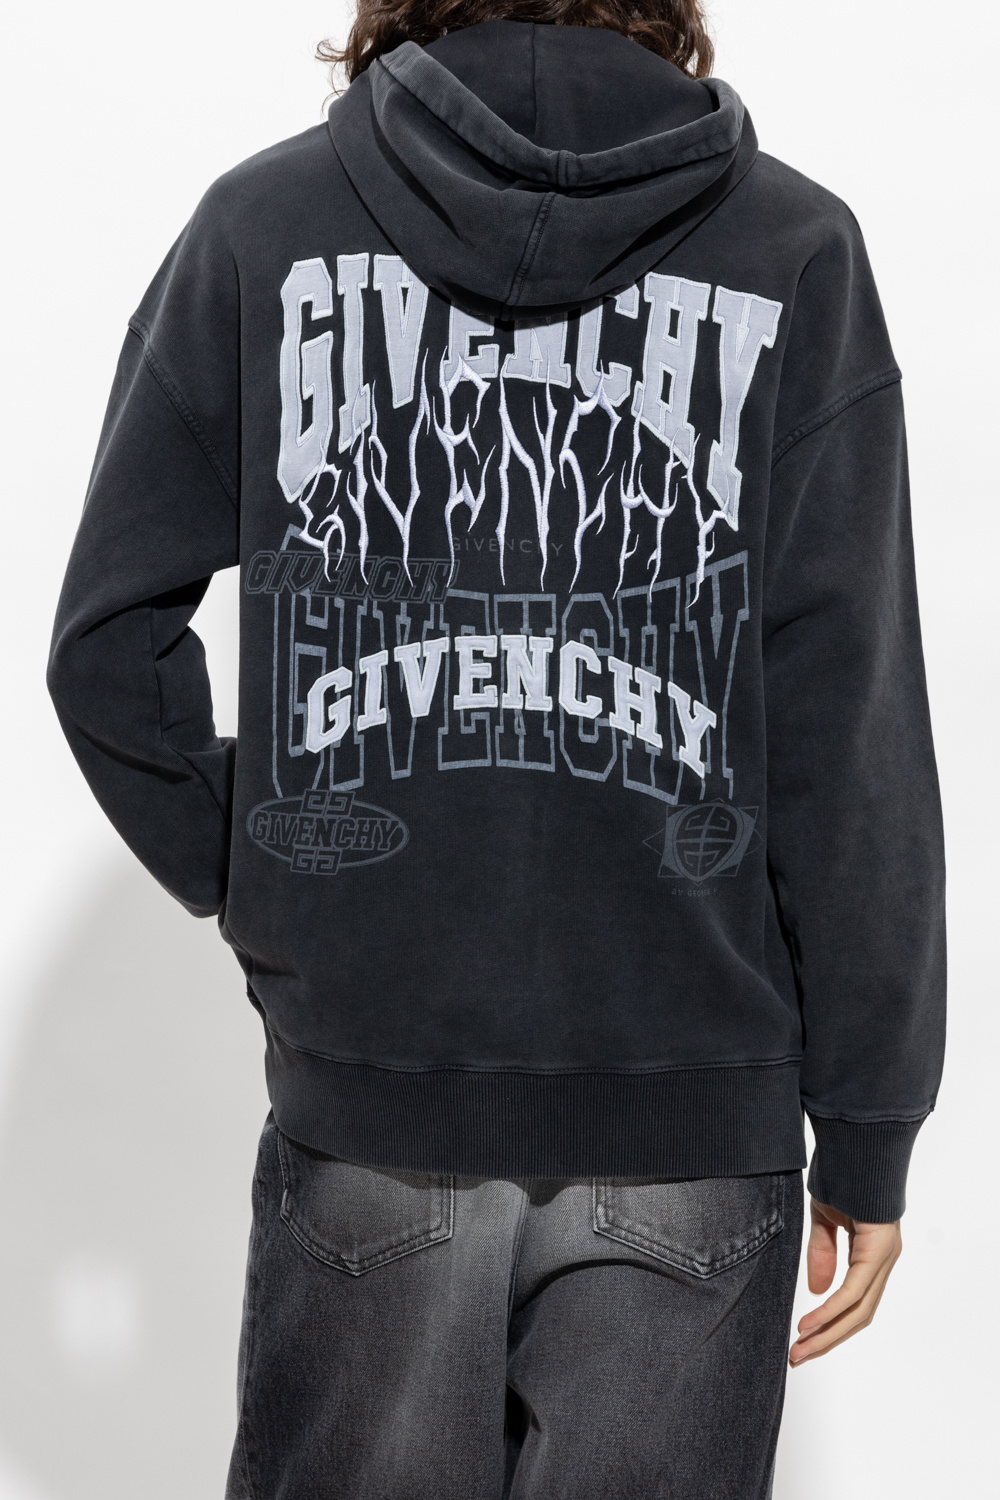 Givenchy Paris strap sneakers | Givenchy Patterned hoodie | Men's